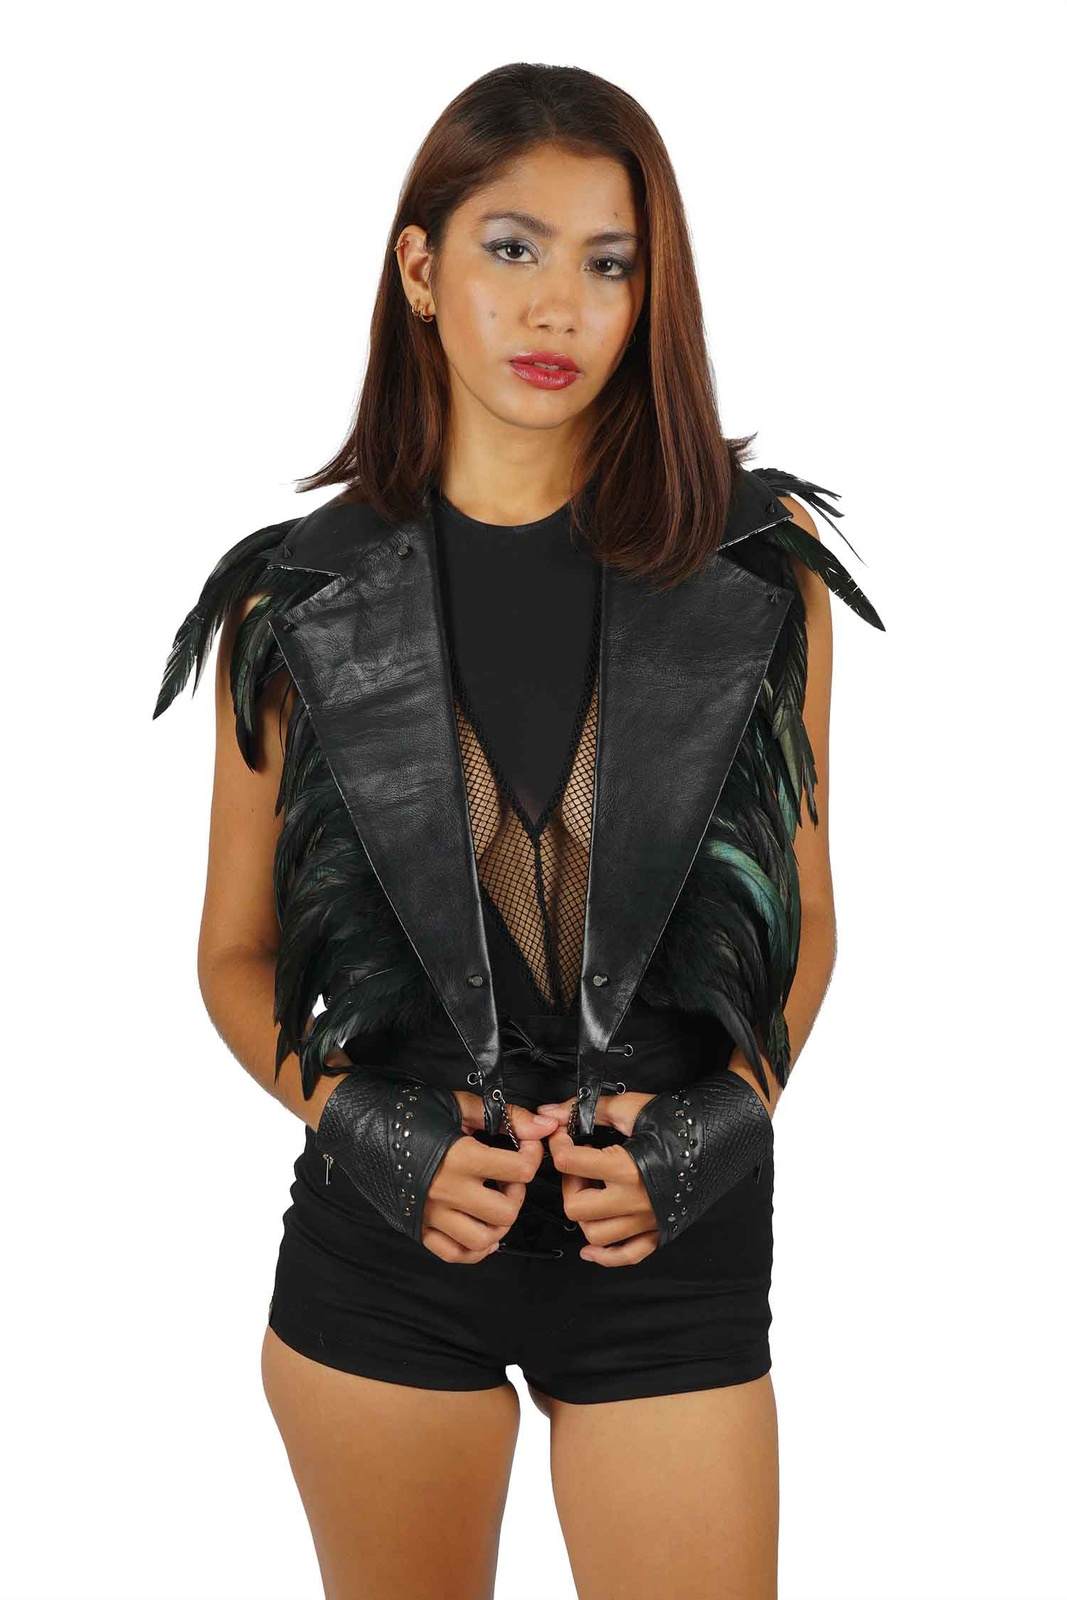 black leather lapels with feathers from Love Khaos